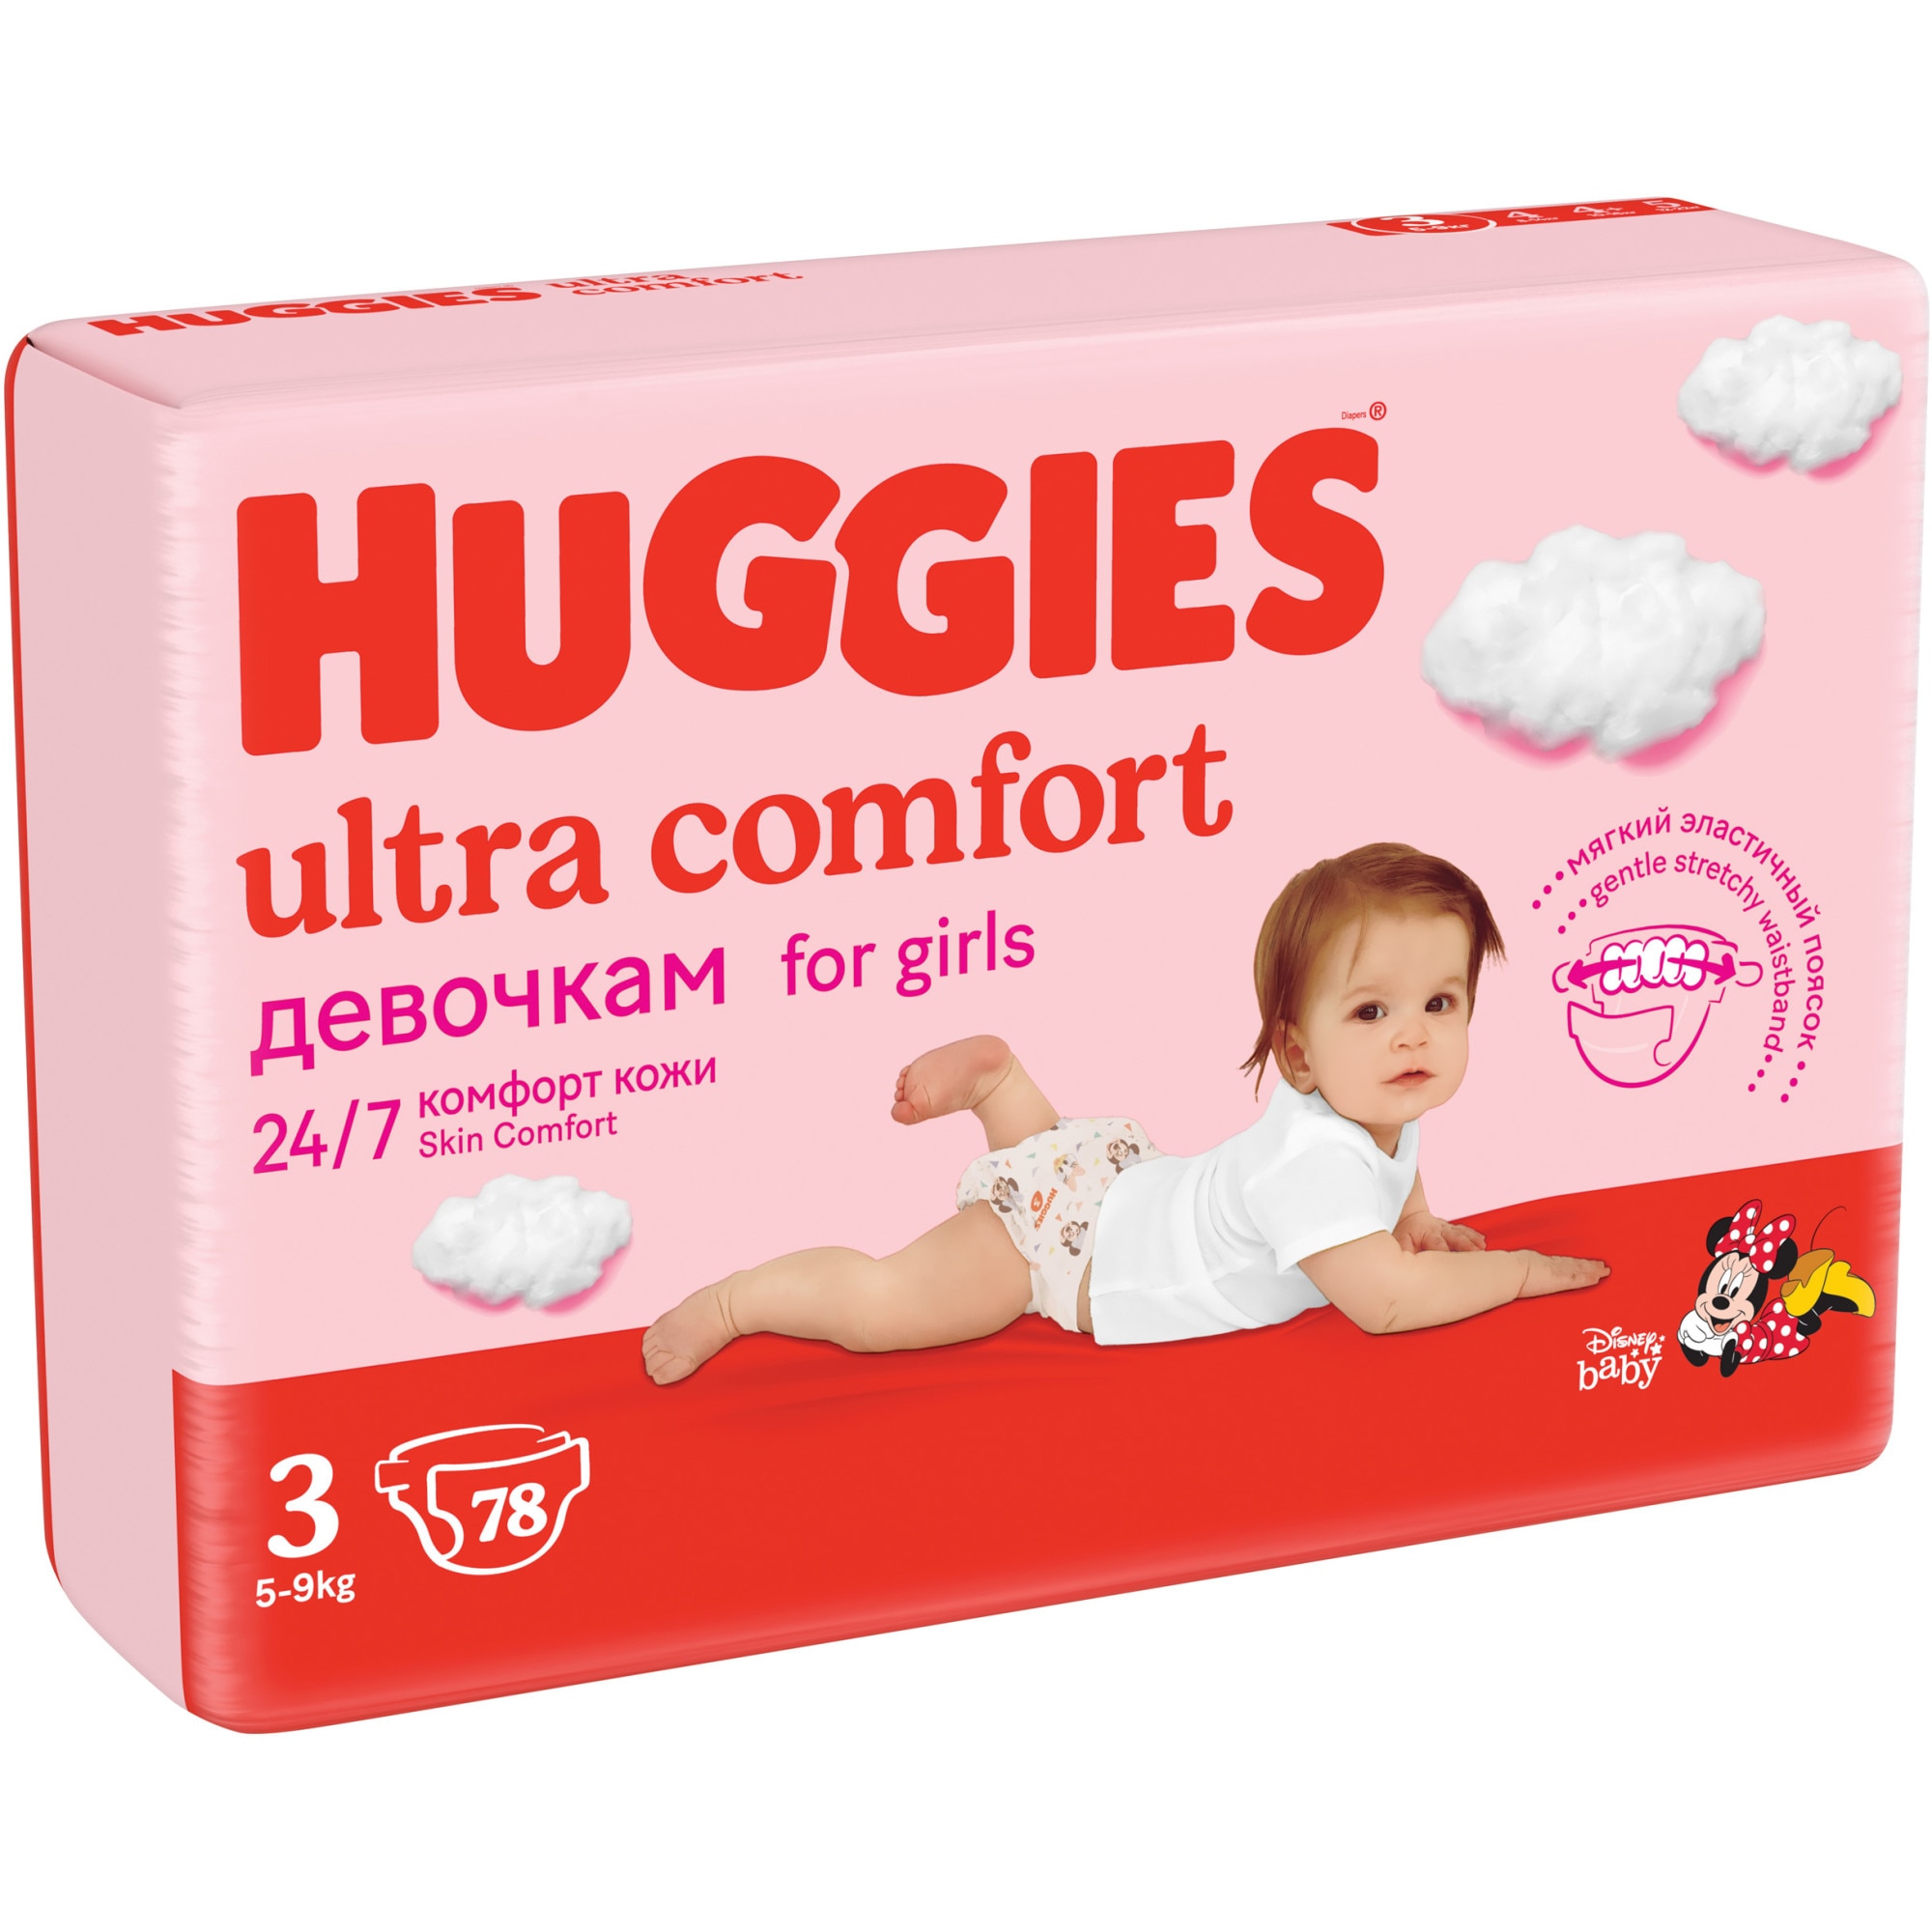 Huggies Ultra Comfort Girl Diapers 3 5-9kg 80pcs ❤️ home delivery from the  store